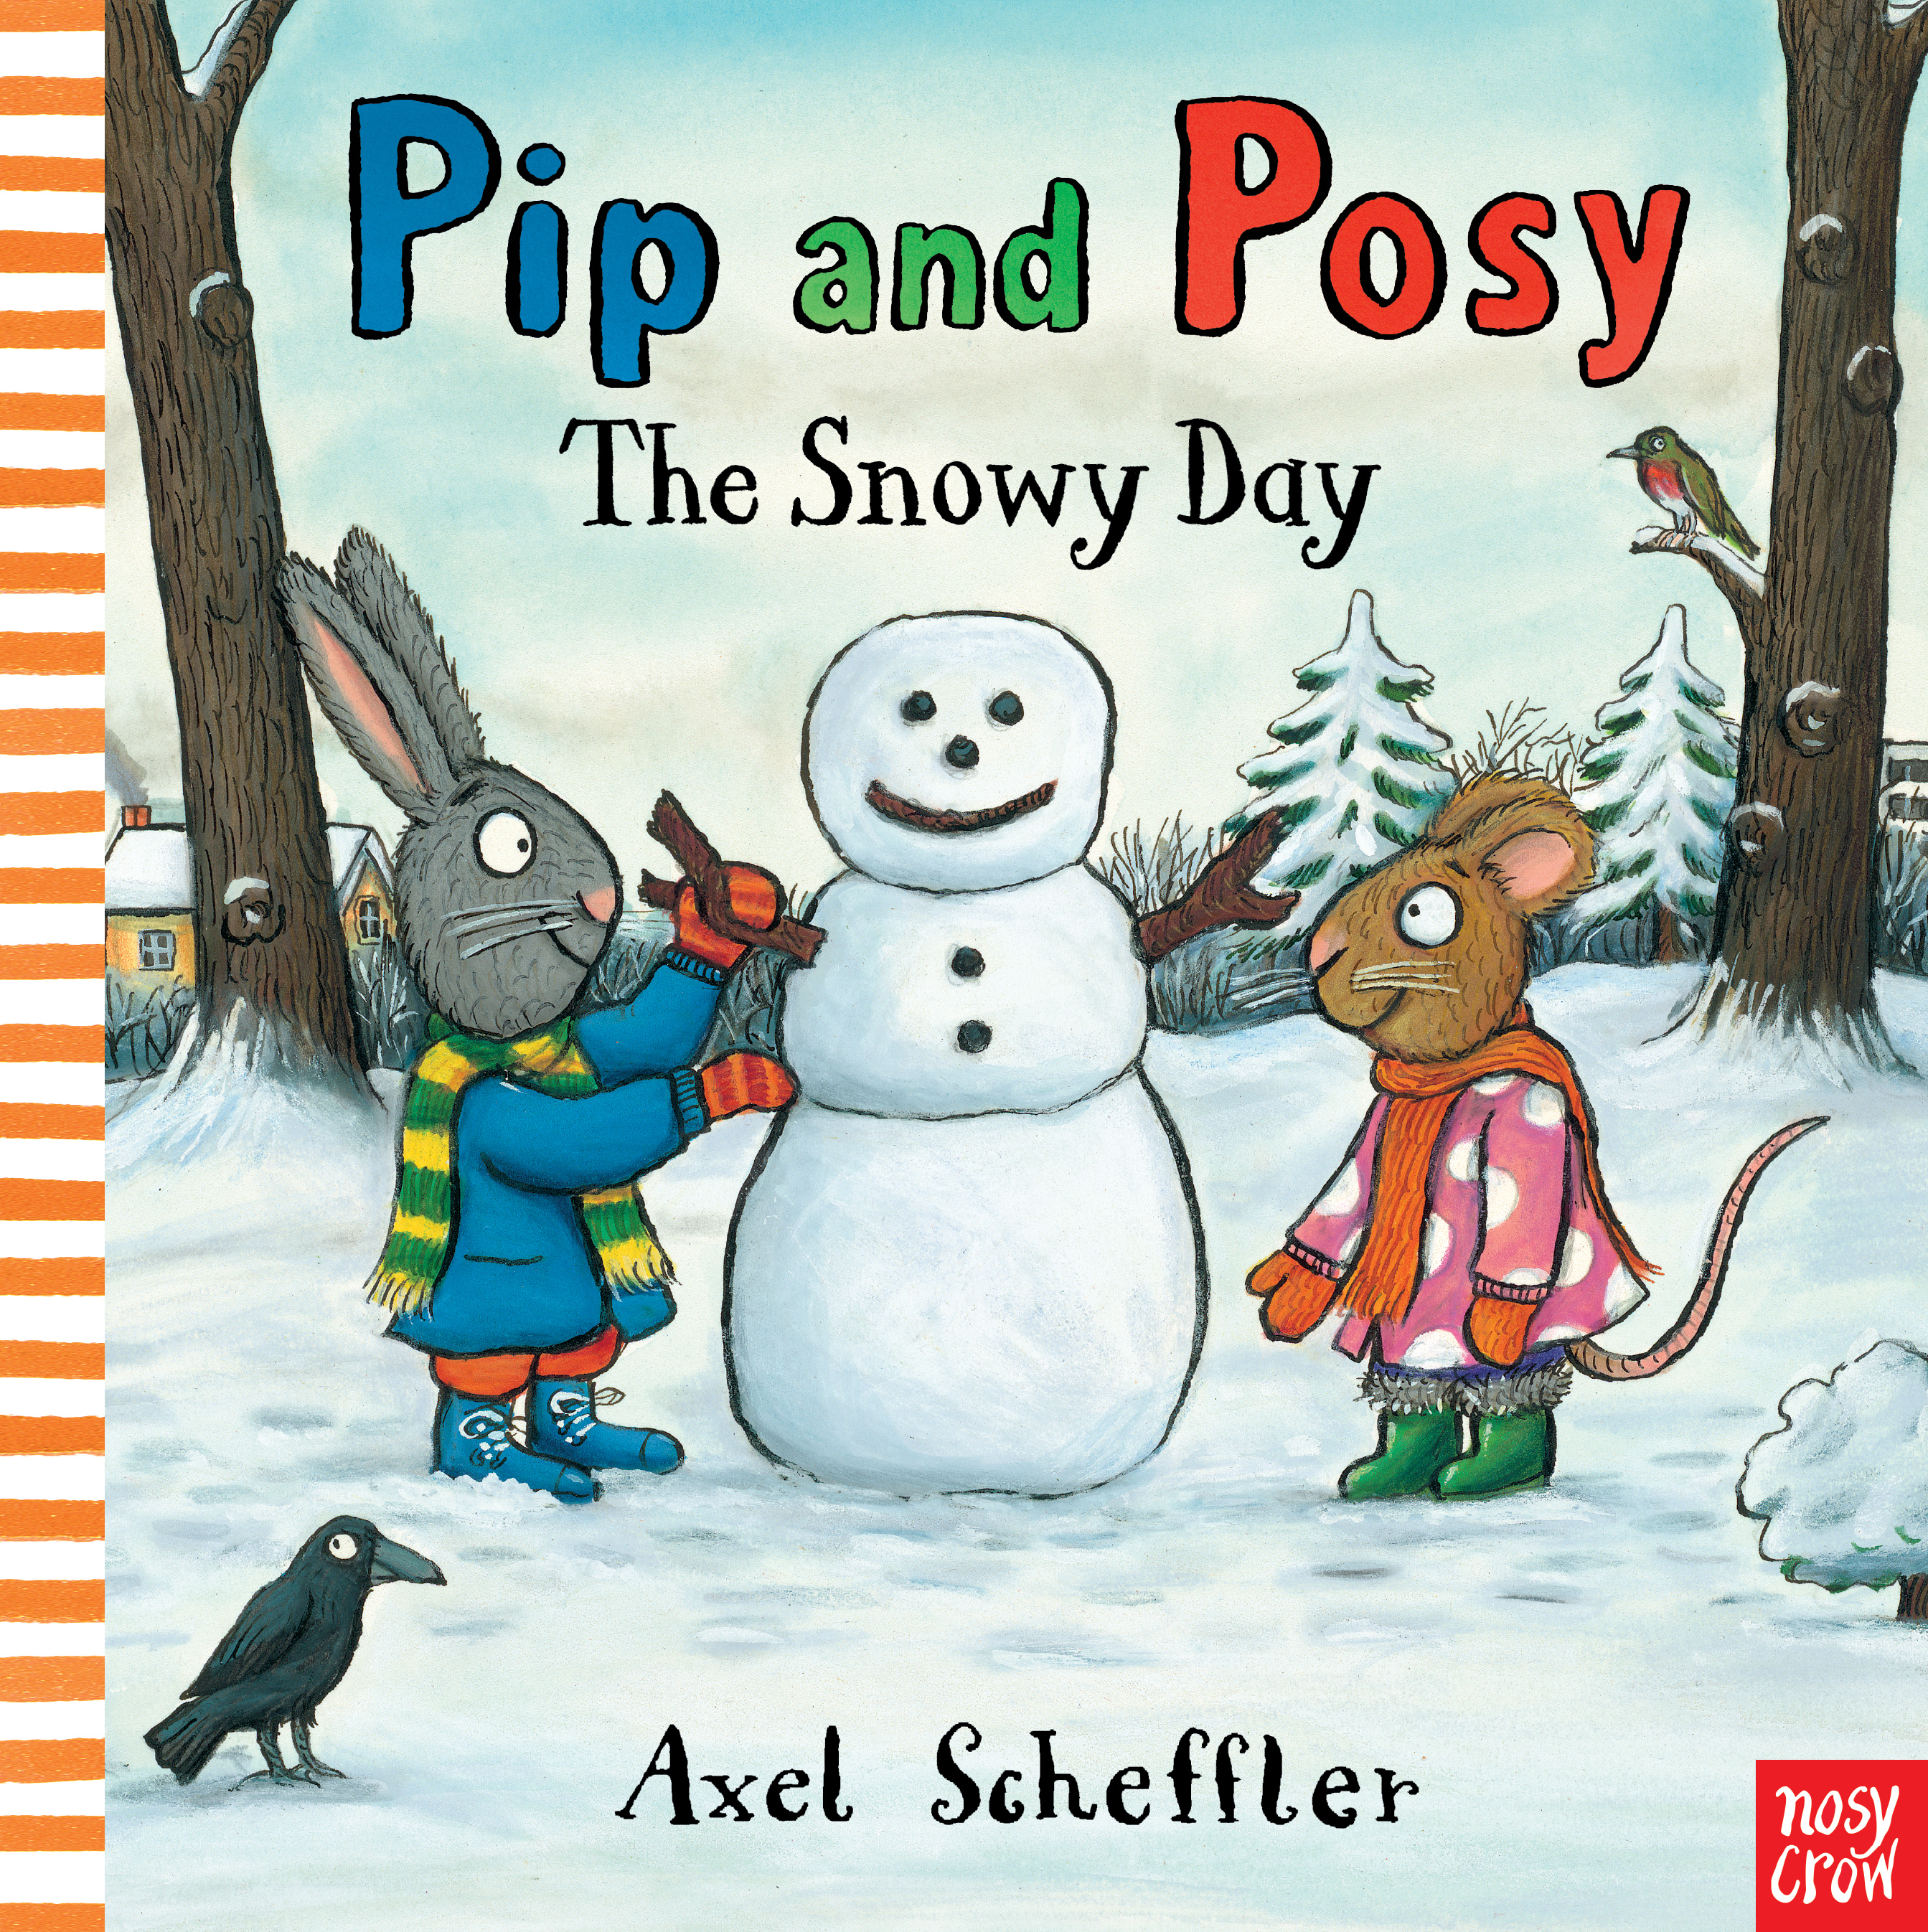 Pip and Posy: The Snowy Day | Nosy Crow